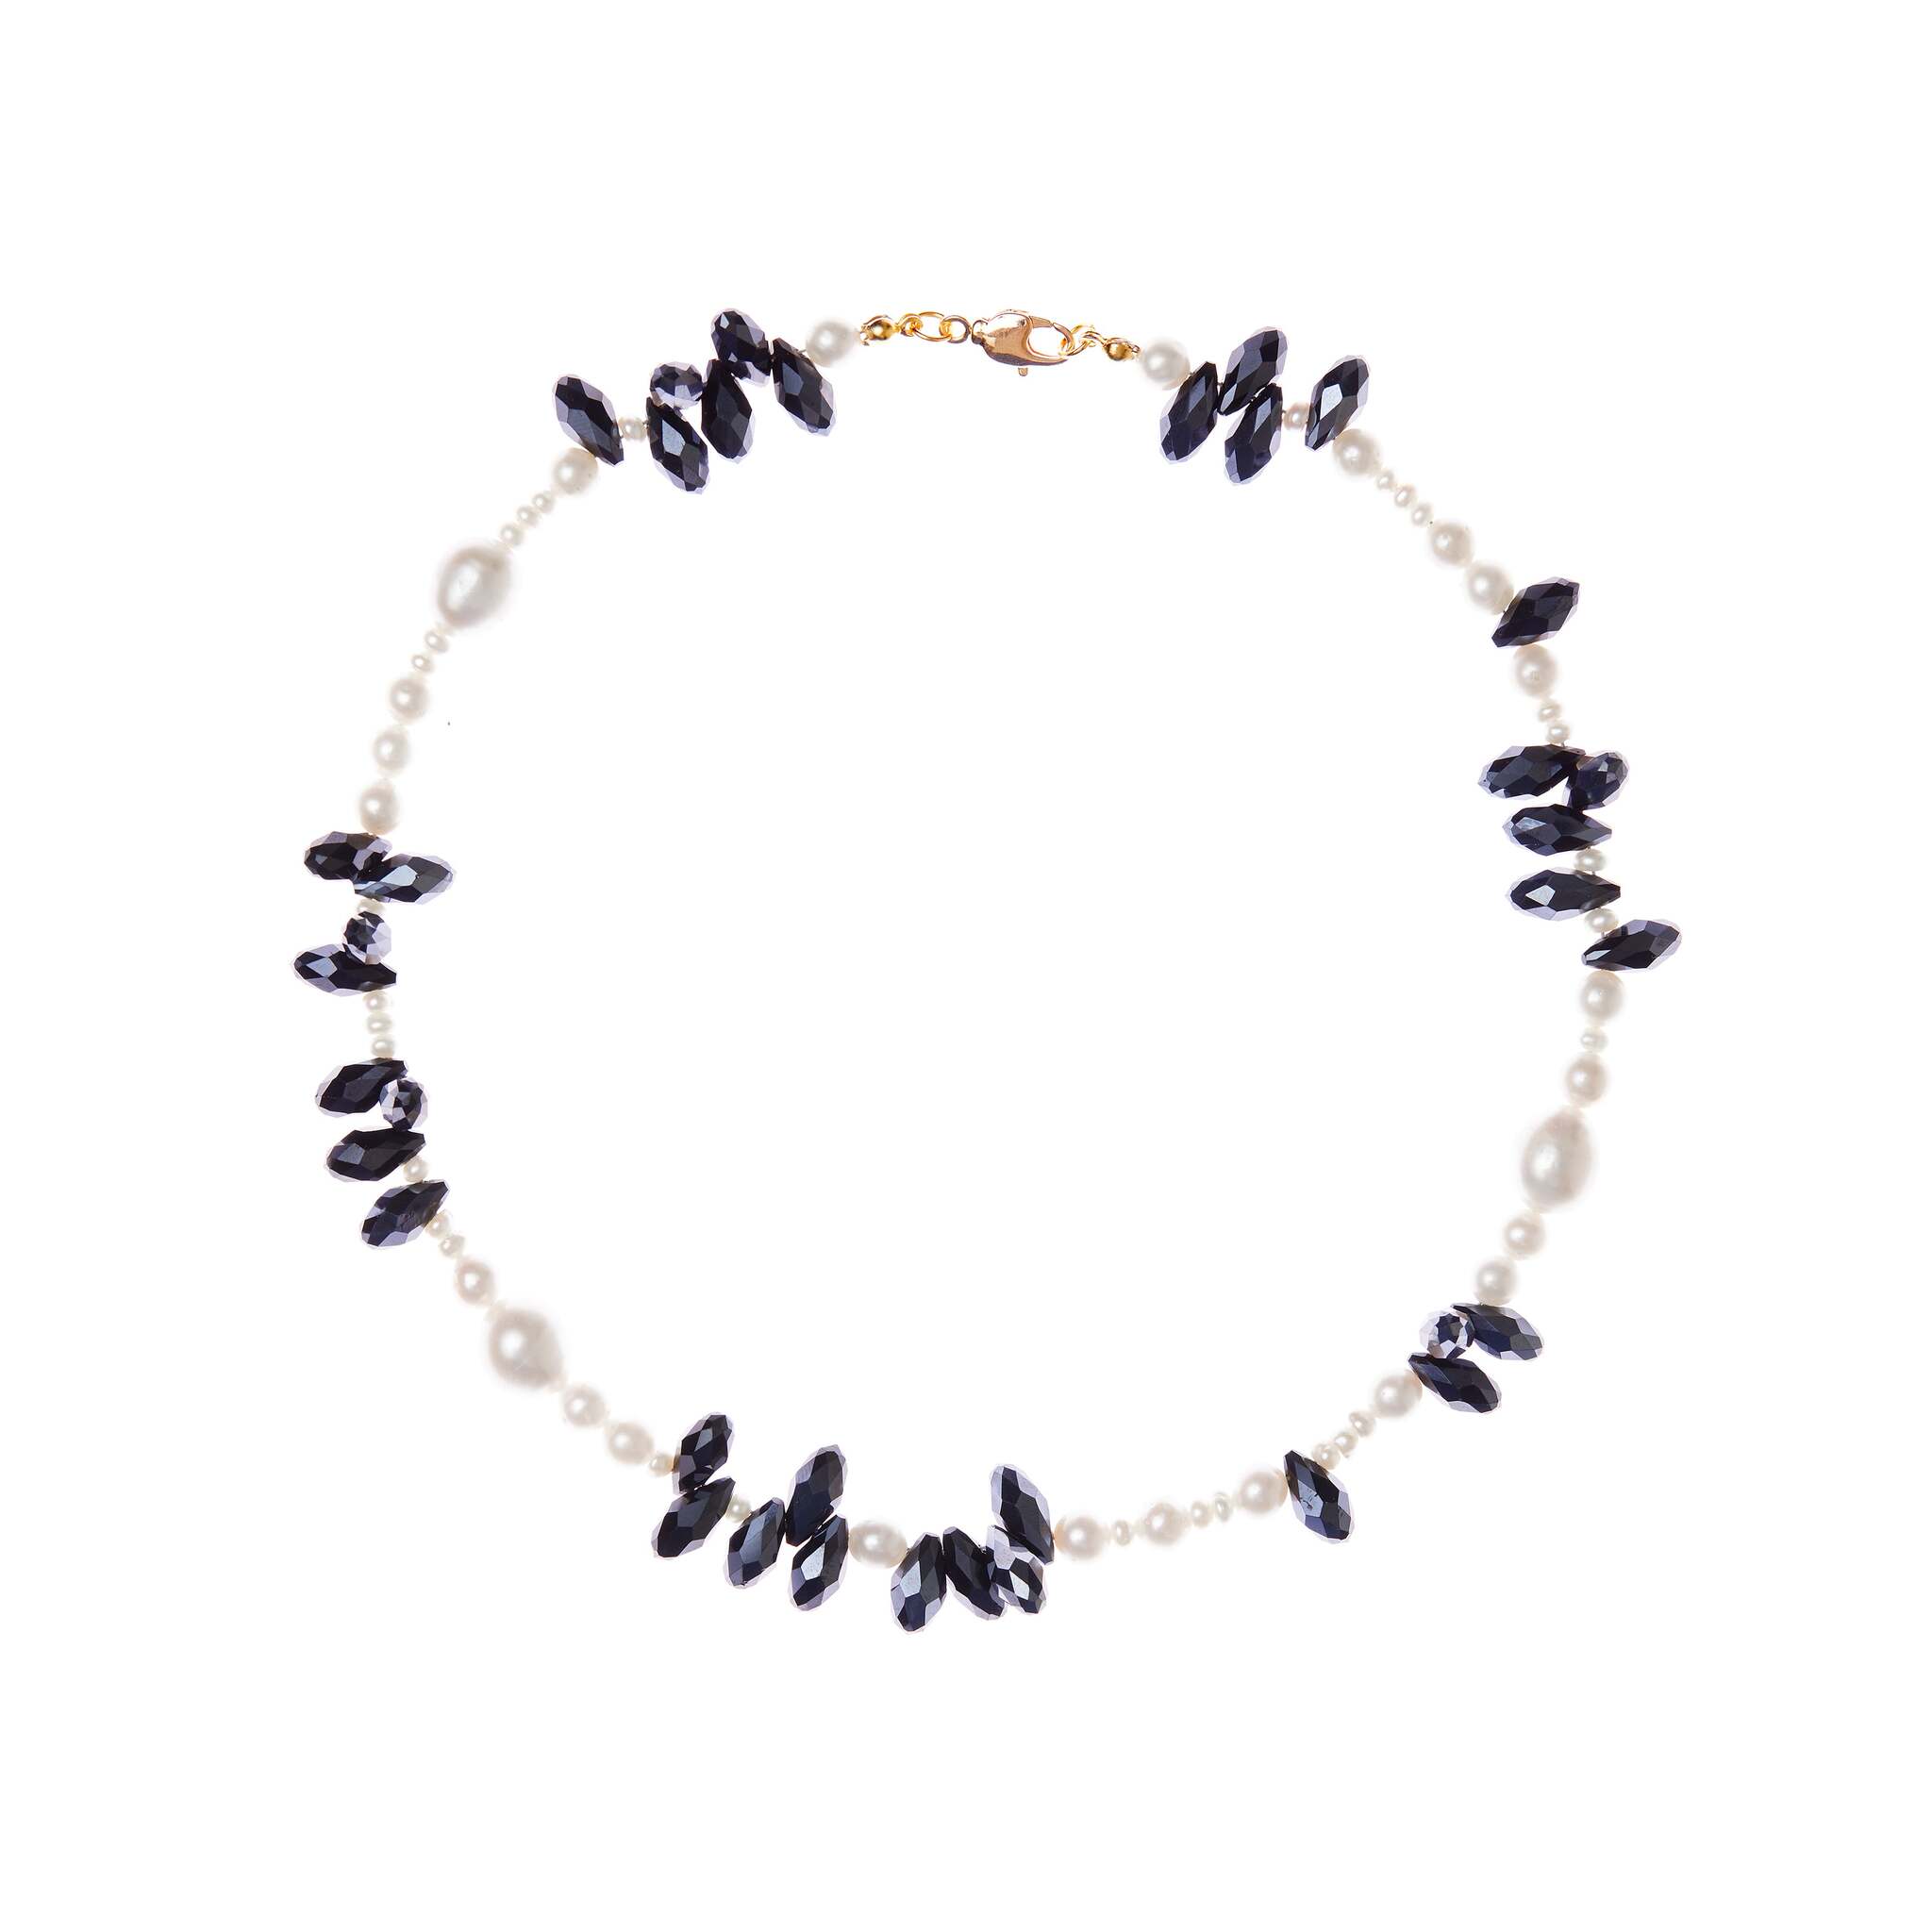 HOLLY JUNE Колье Black And White Crystal Pearl Necklace цена и фото